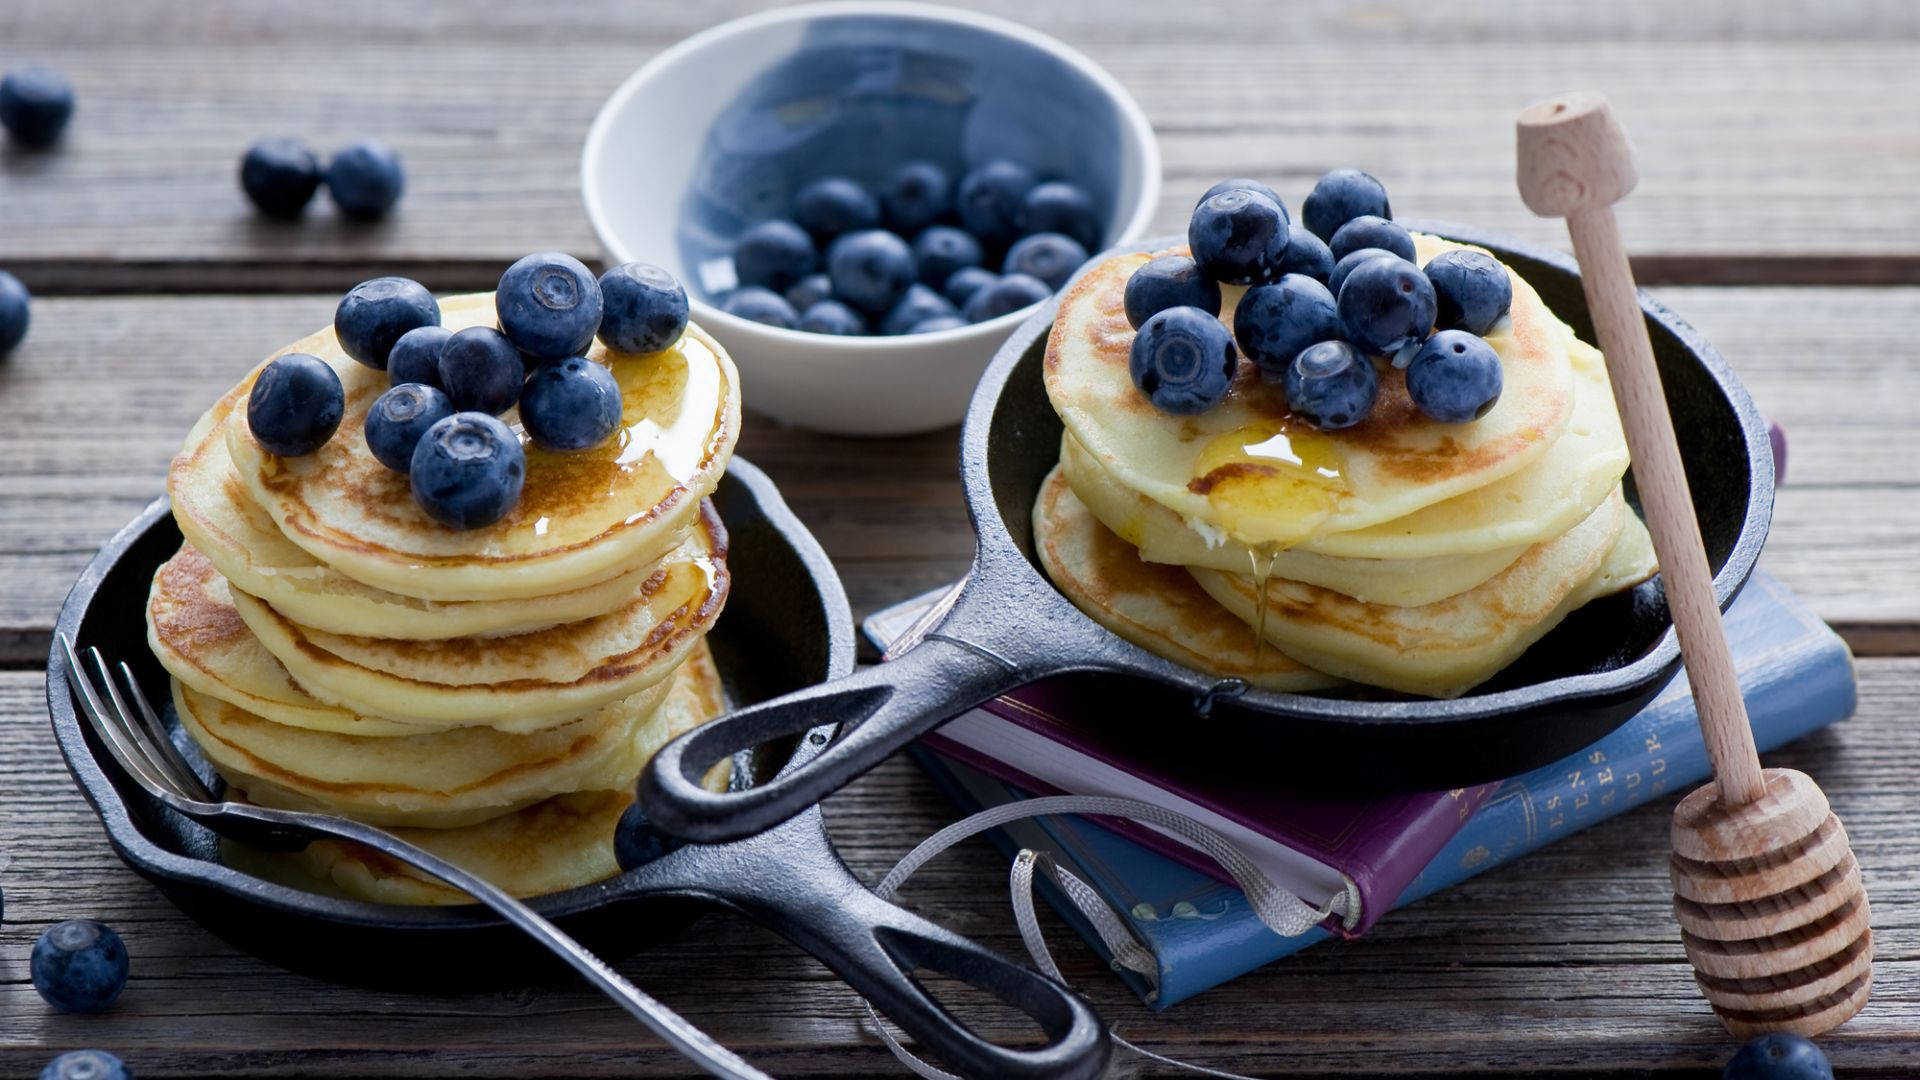 Pancakes On Pan With Berries